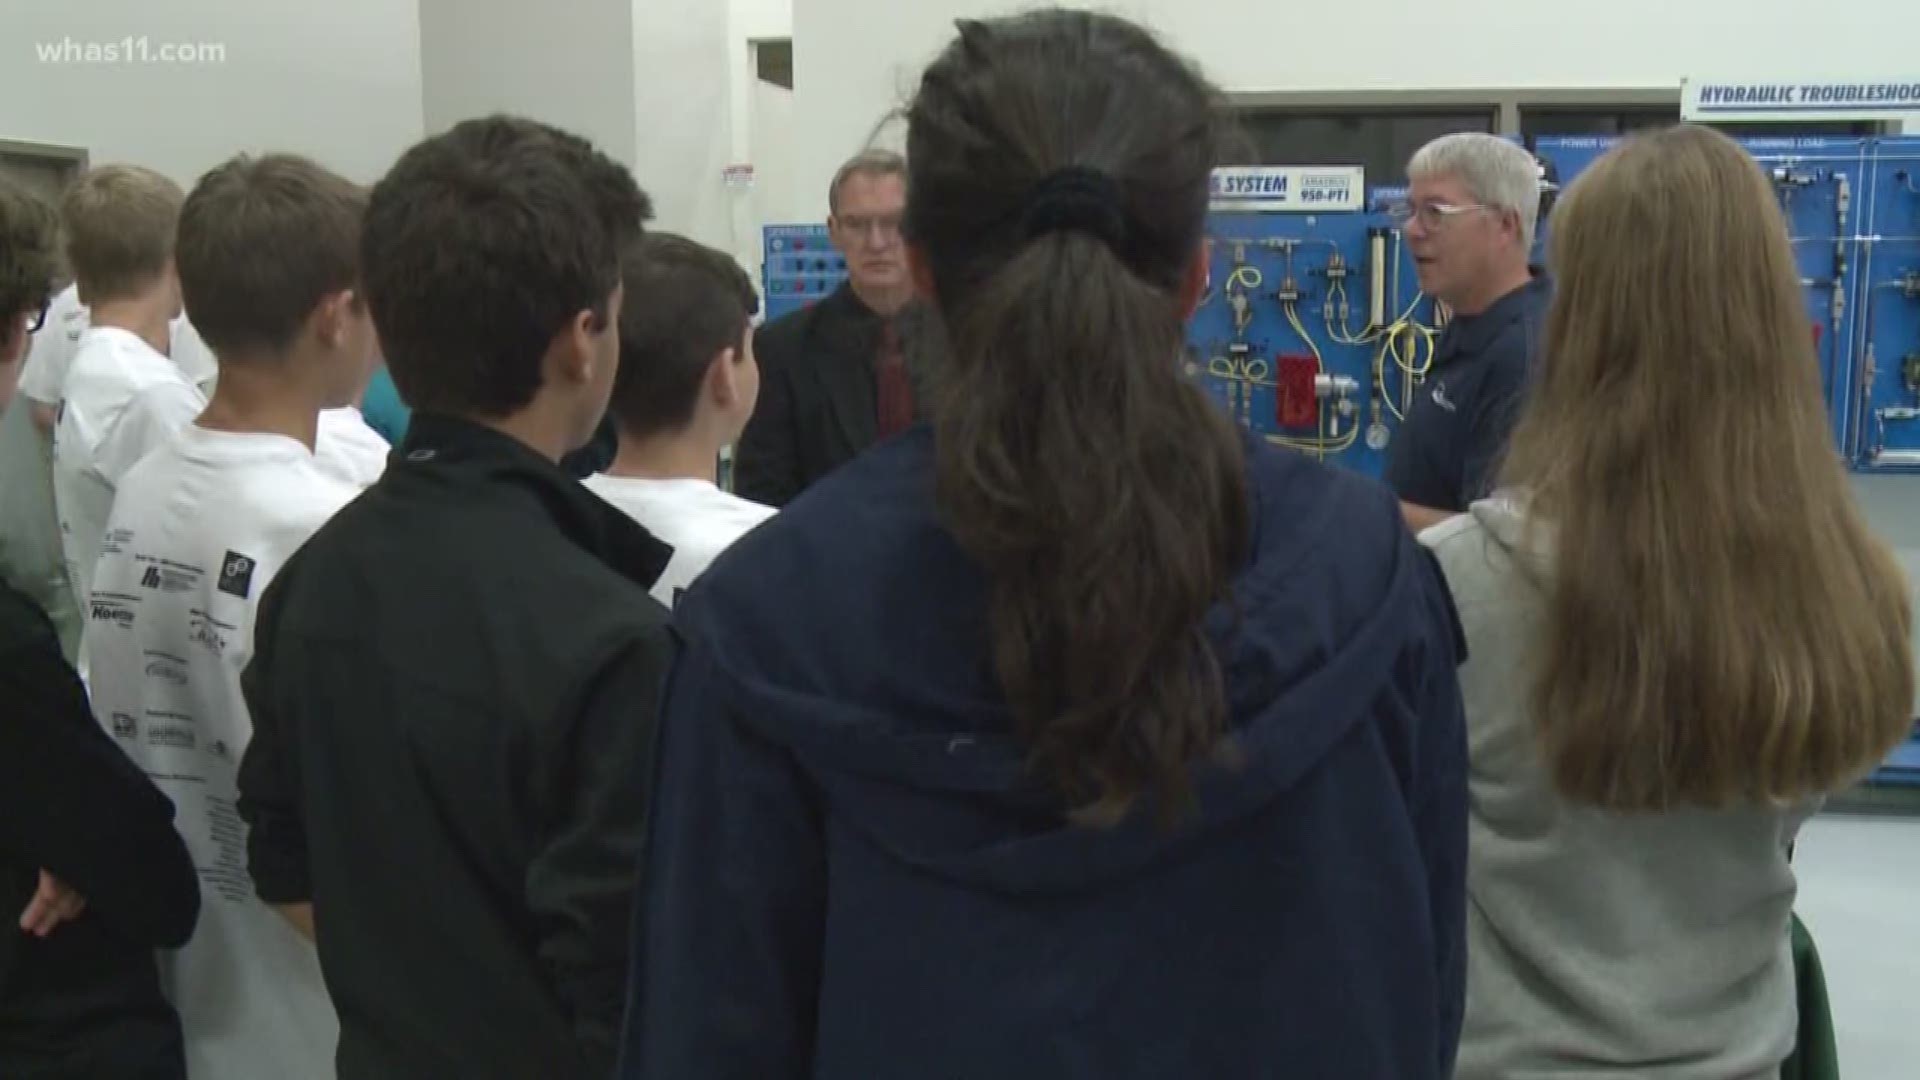 Nearly 14-hundred high school students in southern Indiana will get to some learning outside of the classroom this week, and maybe get a leg up on a future career.